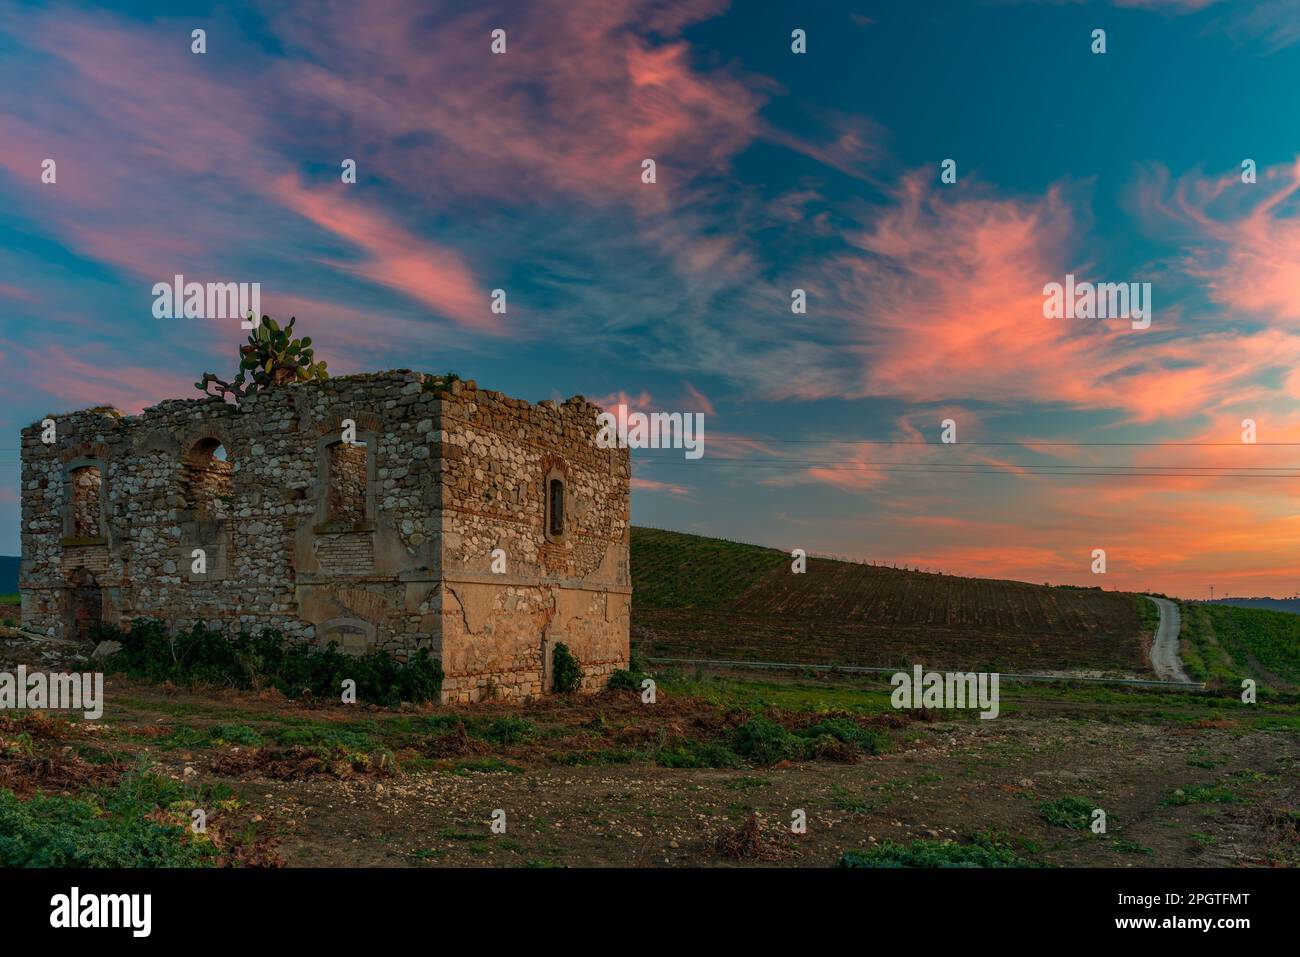 Abandoned country house at dusk in the Sicilian hinterland, Italy Stock Photo